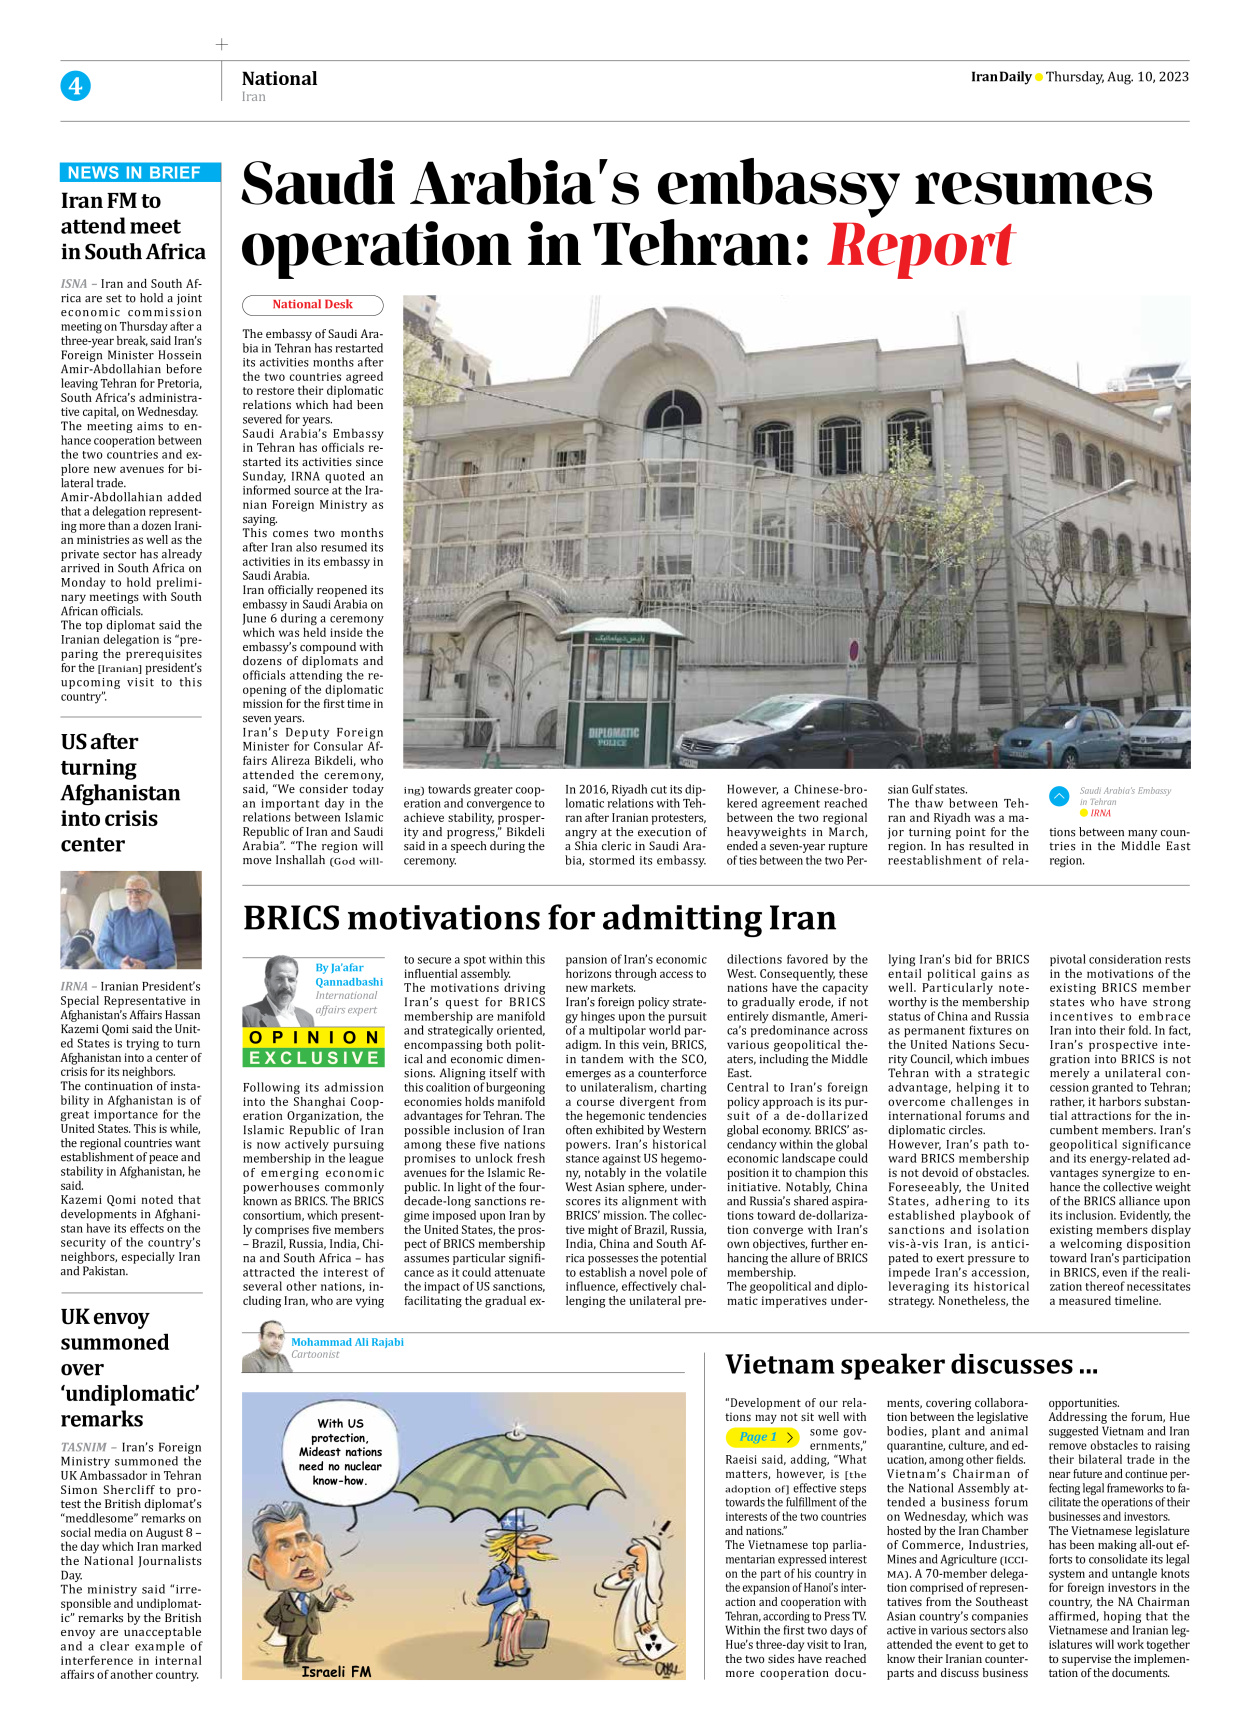 Iran Daily - Number Seven Thousand Three Hundred and Fifty Nine - 10 August 2023 - Page 4